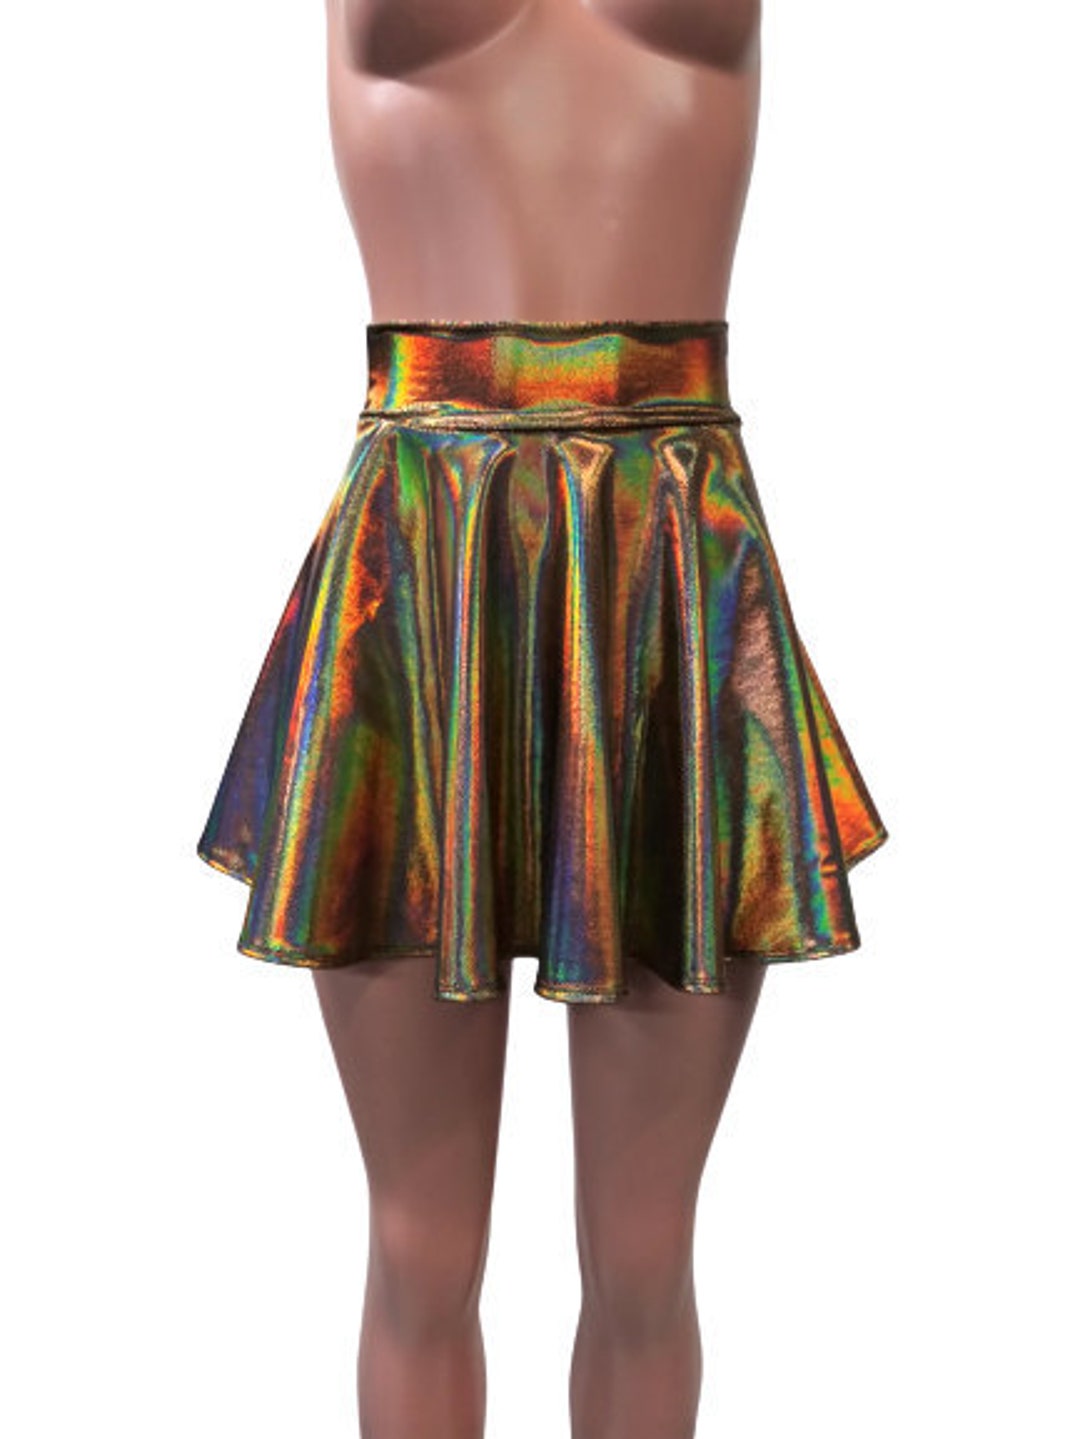 Gleaming Bronze Skater Skirt, Circle Skirt Soft Flowing Fabric Comes in ...